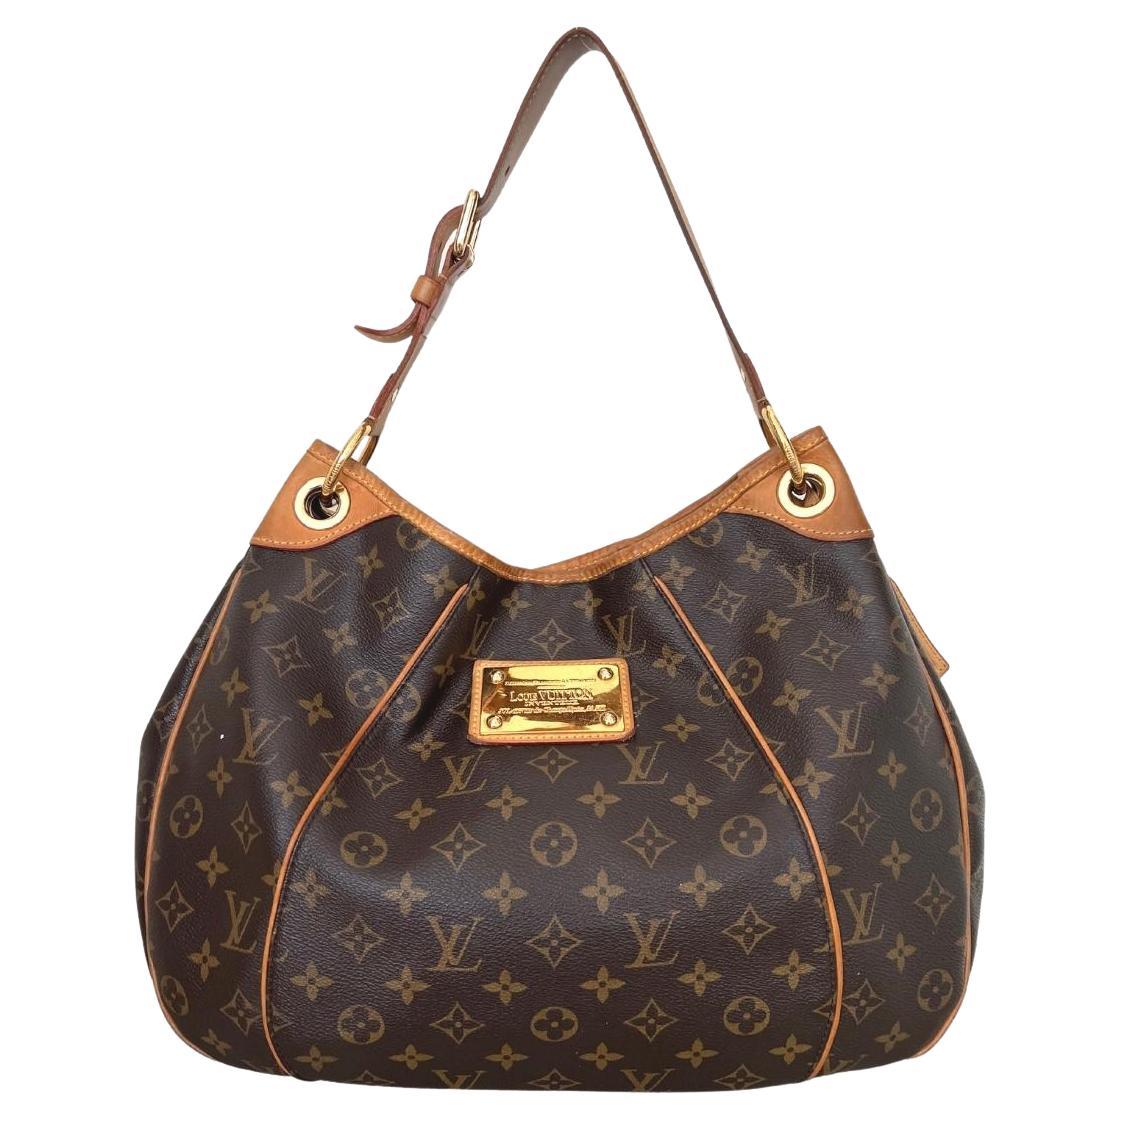 Galliera Bag - 10 For Sale on 1stDibs | louis vuitton galliera pm, louis  vuitton galliera, galliera pm